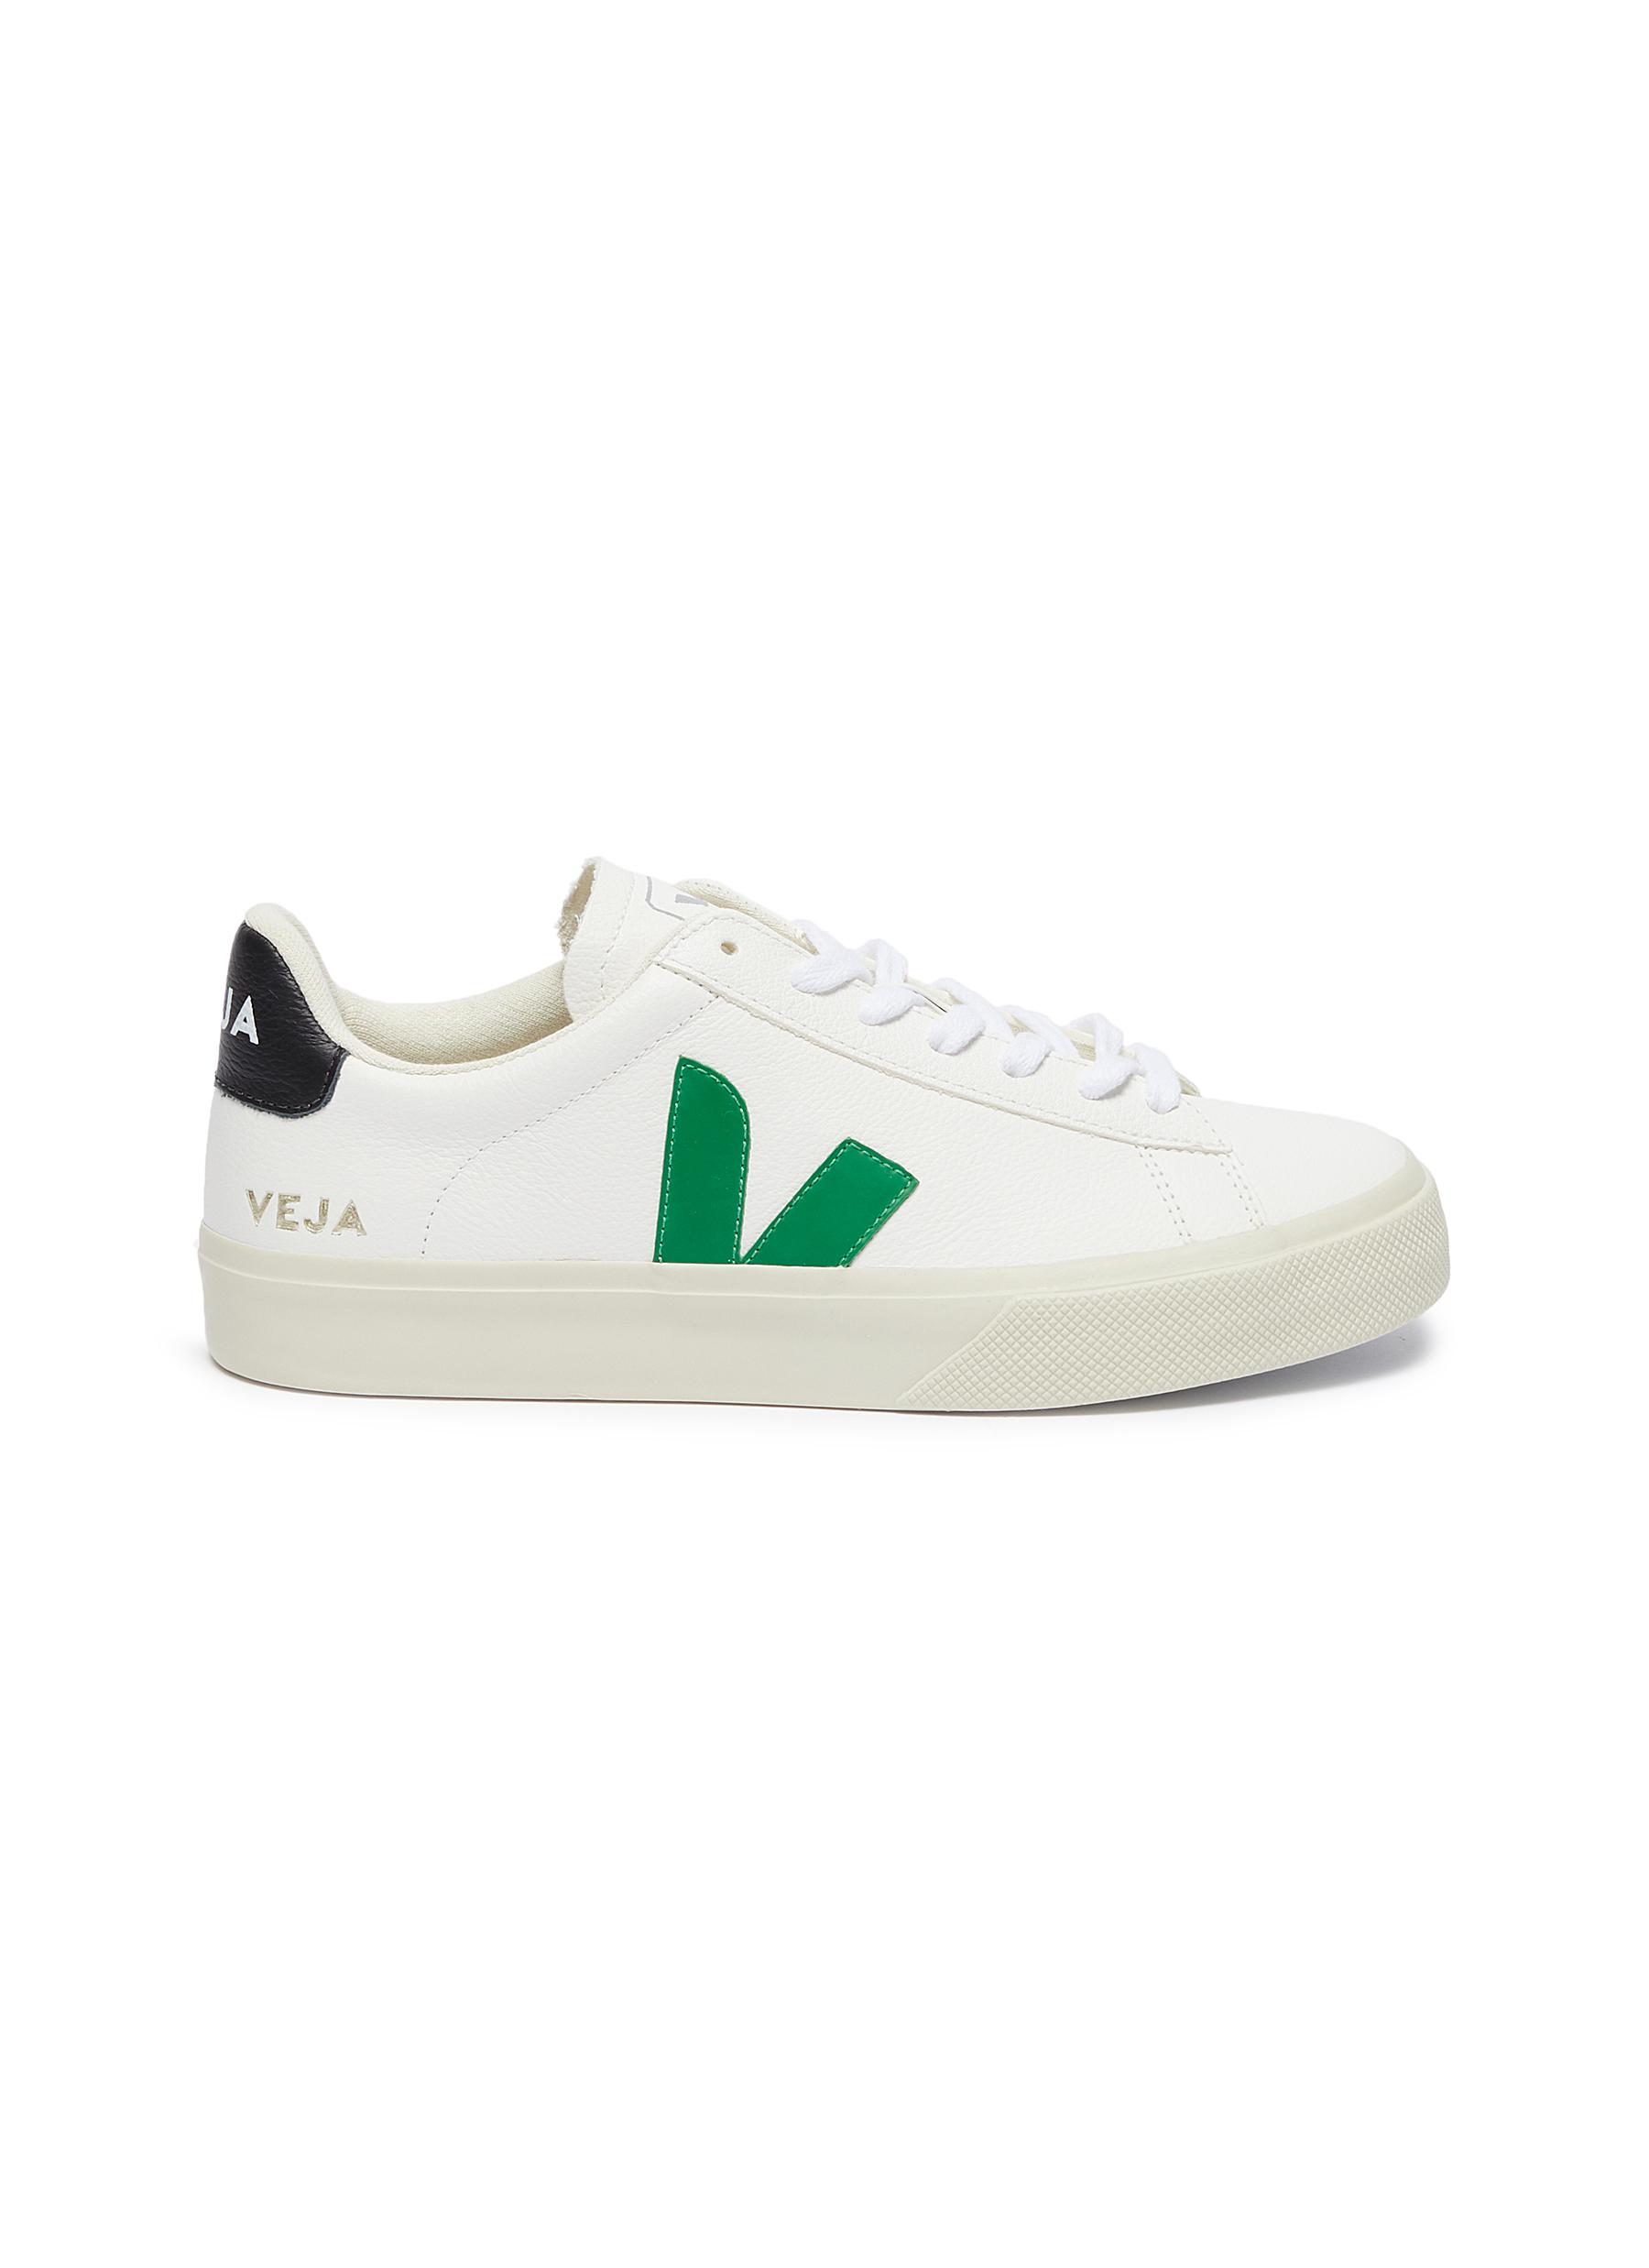 Veja 'campo' Chromefree Leather Sneakers In White